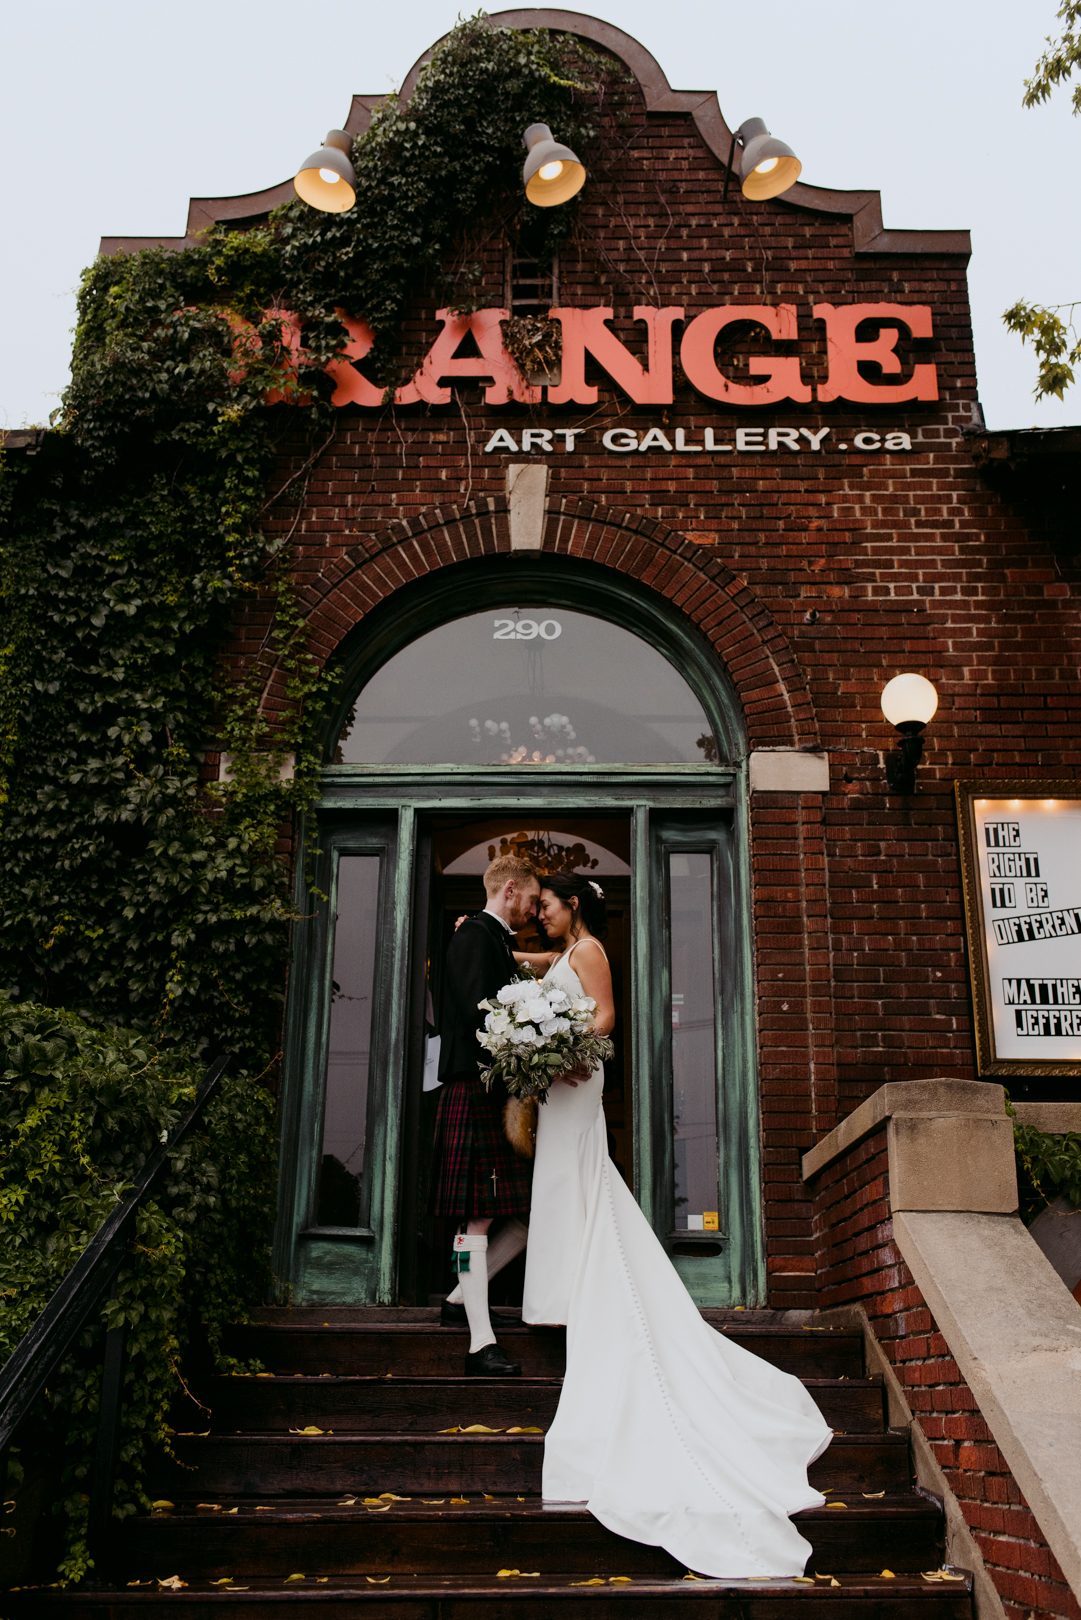 bride and groom standing on steps of the Orange Art Gallery with bride's train down the steps